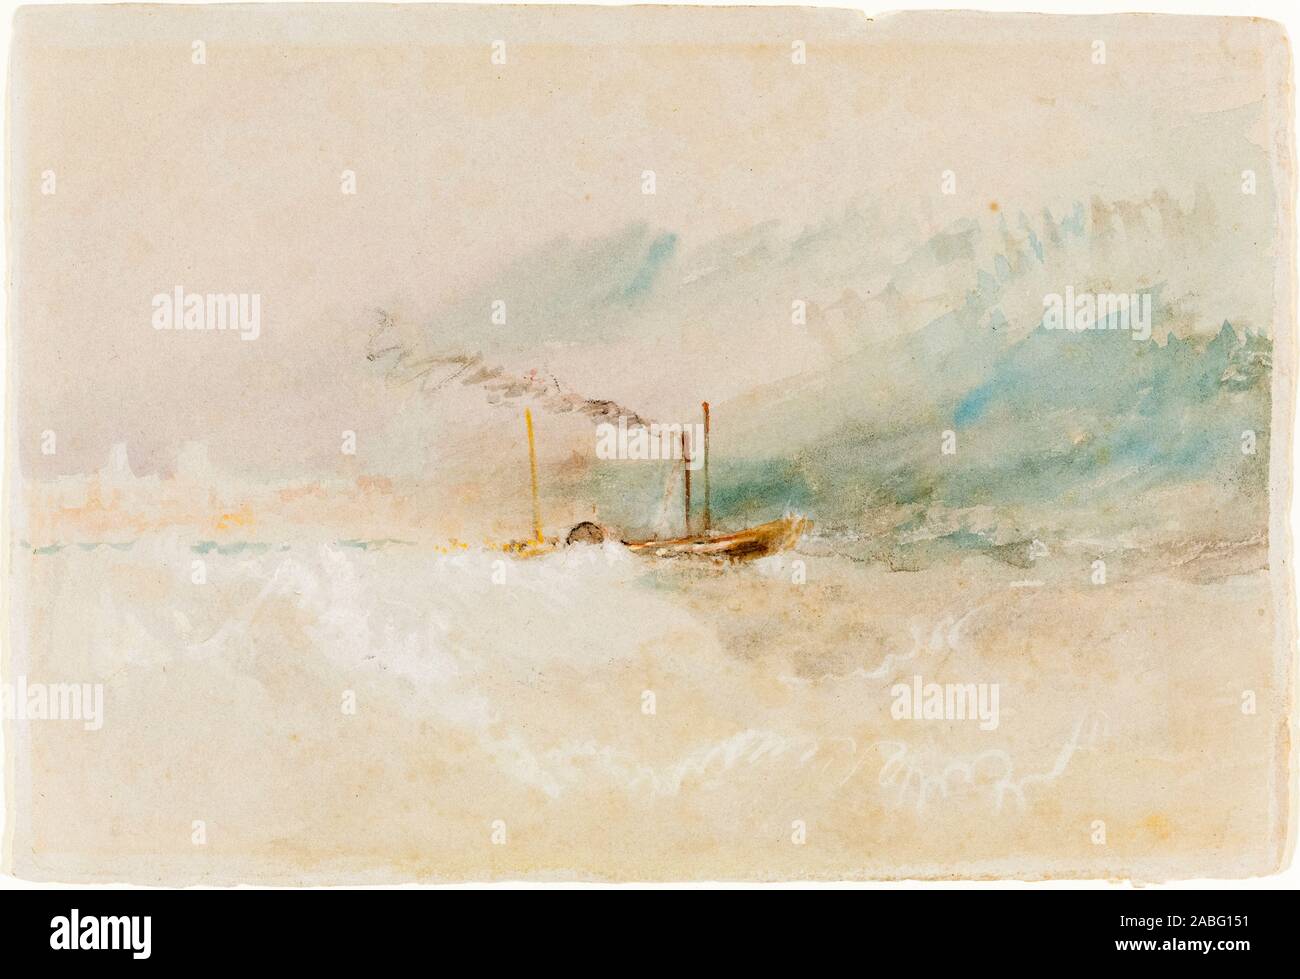 JMW Turner, A Packet Boat off Dover, landscape painting, circa 1836 Stock Photo